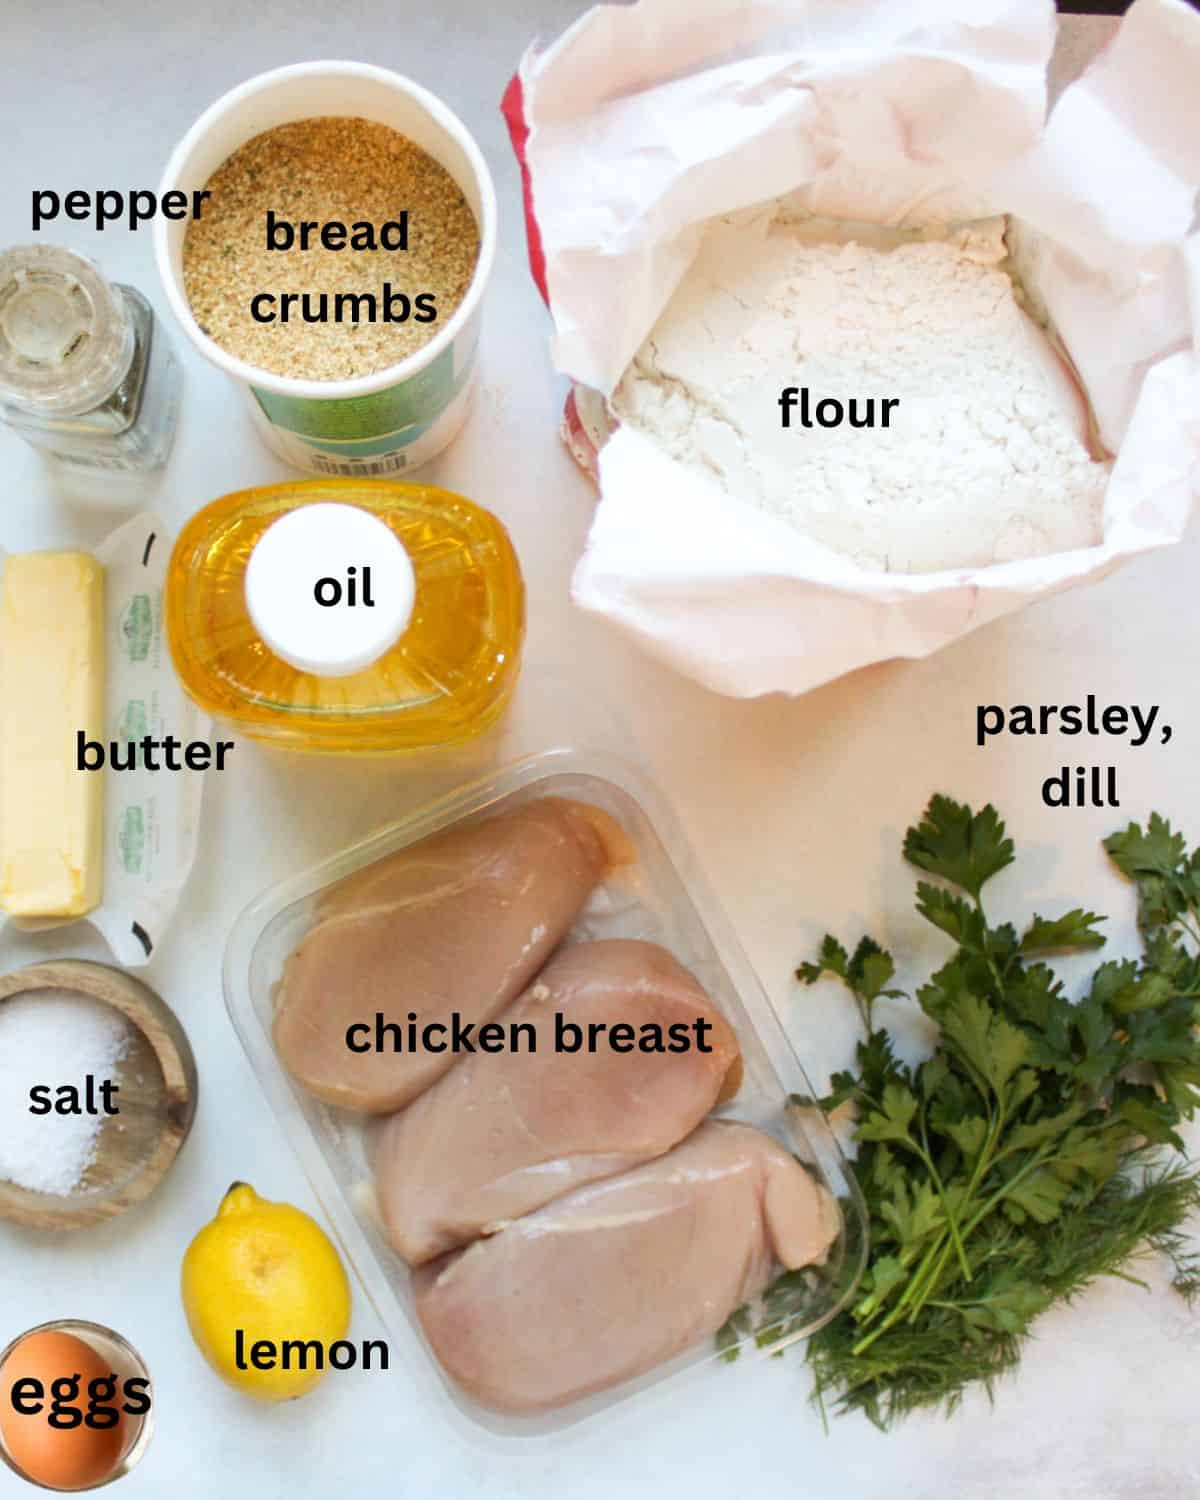 Recipe ingredients on a white surface labeled as salt, butter, breadcrumbs, oil, chicken breast, flour parsley, eggs, lemon, dill.